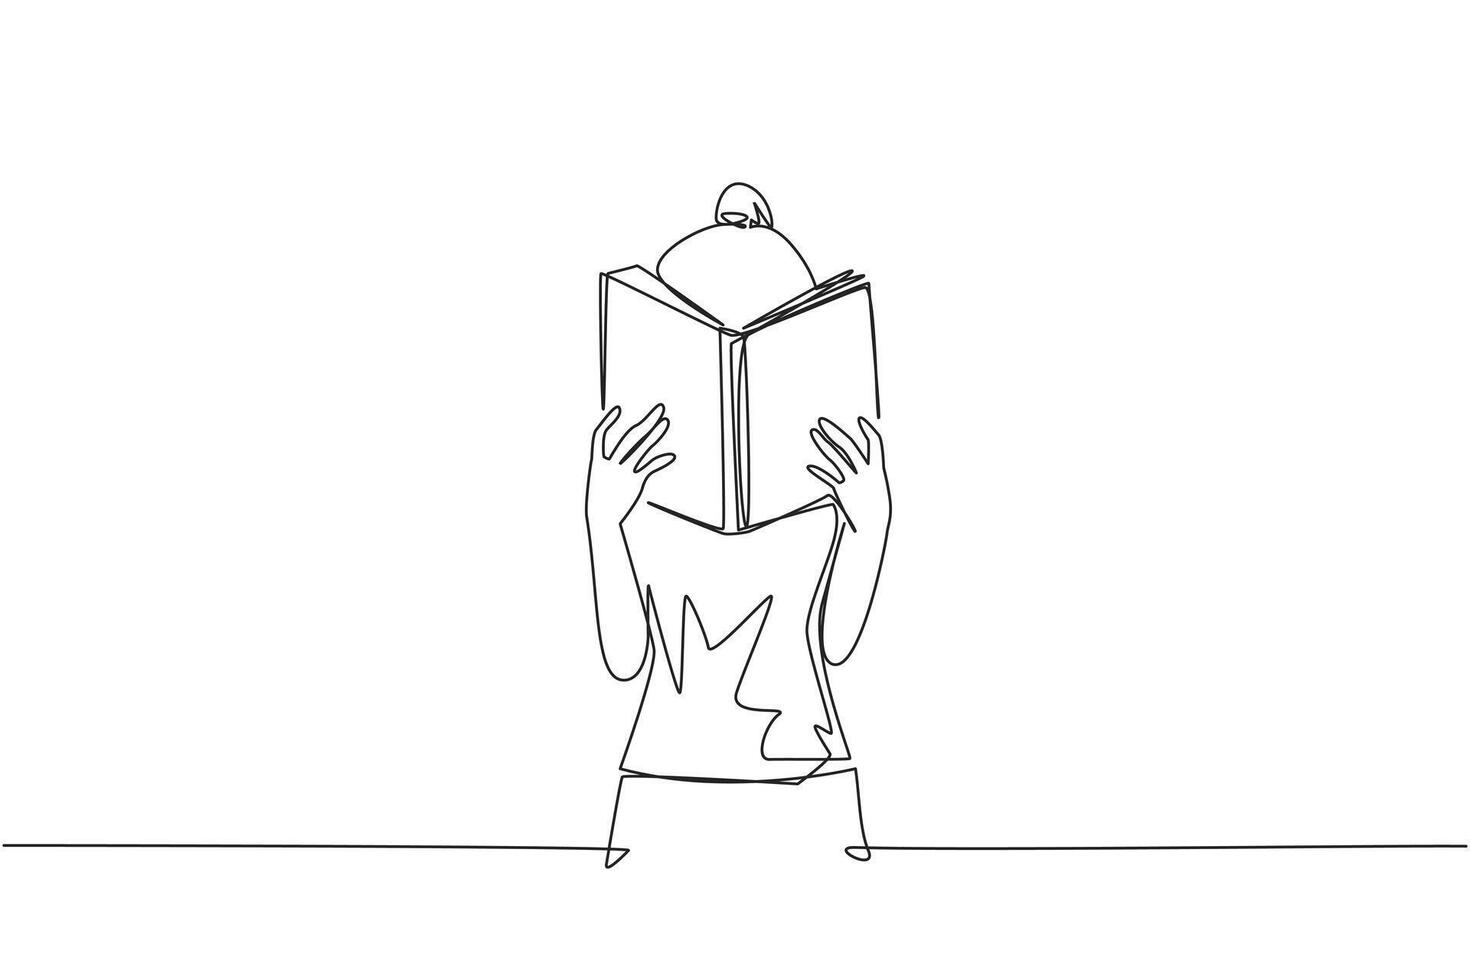 Single continuous line drawing woman seriously reading a book until cover the face. Nervous when facing the final exams. Try to focus. Reading increases insight. One line design illustration vector